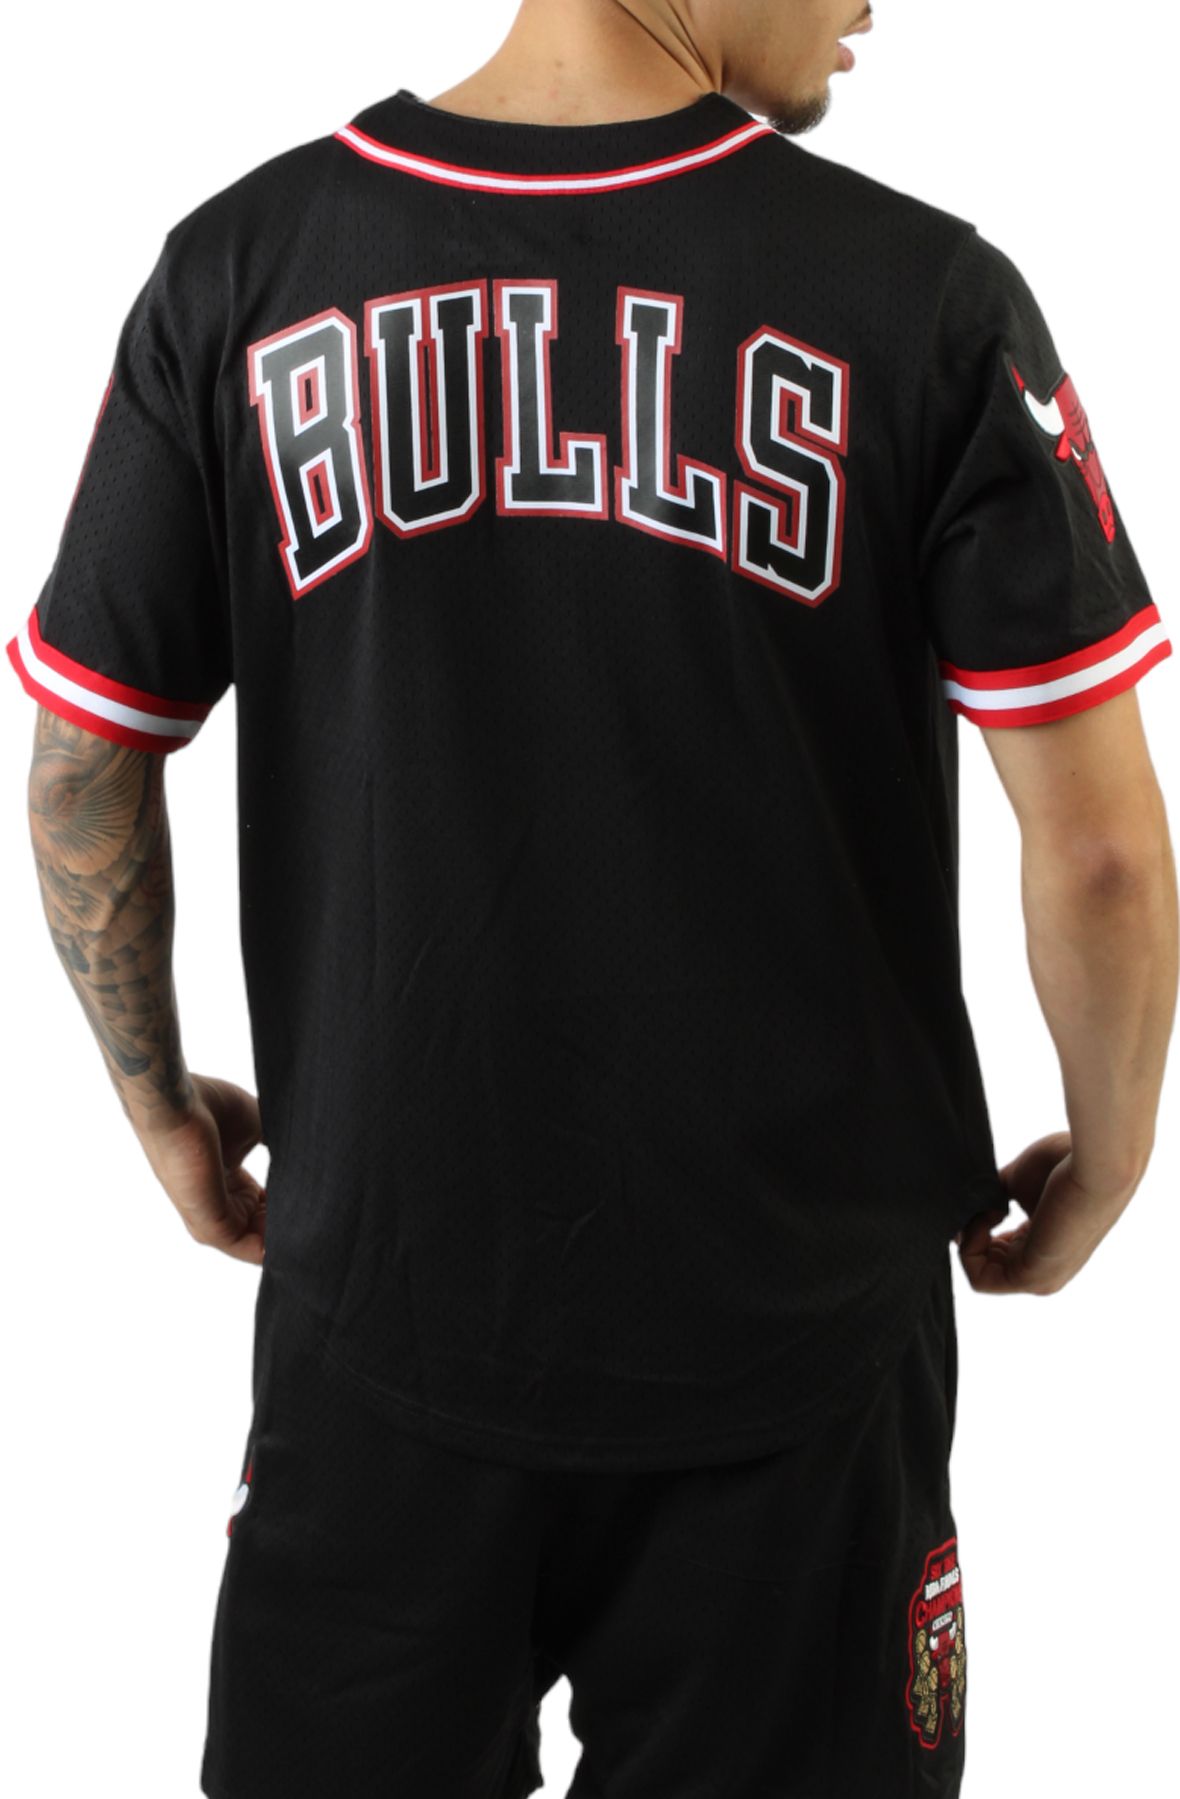 Exclusive Fitted Pro Standard V-Neck Chicago Bulls White Mesh Jersey S